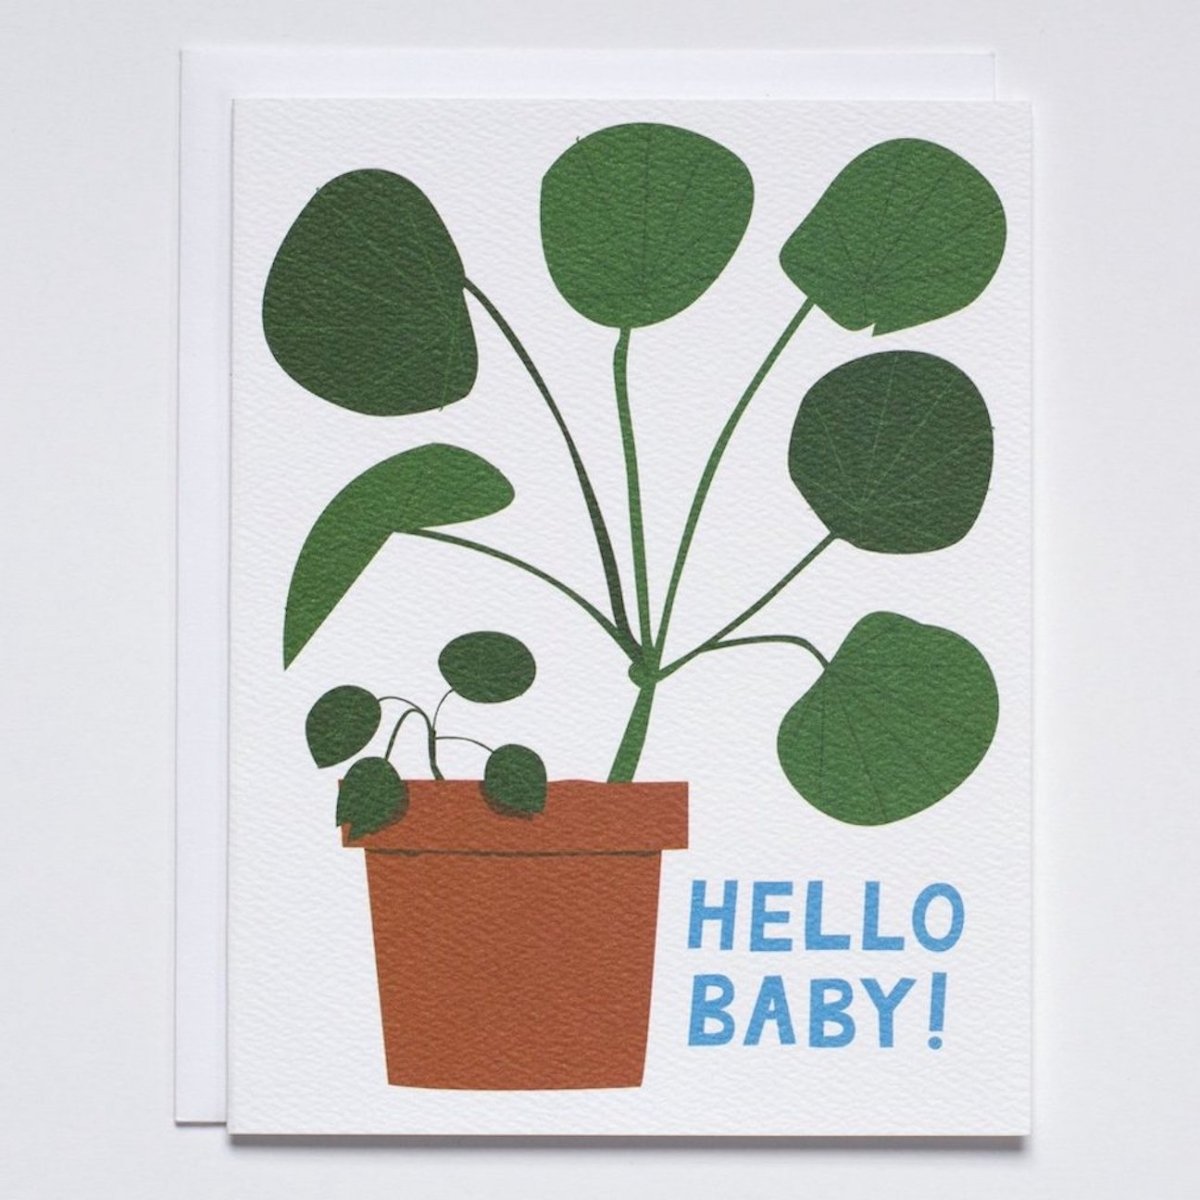 White card with an image of a Pilea plant in a terracotta pot. Bottom of card reads: "HELLO BABY!" in blue font. Made with recycled paper by Banquet Atelier in Vancouver, British Columbia, Canada.